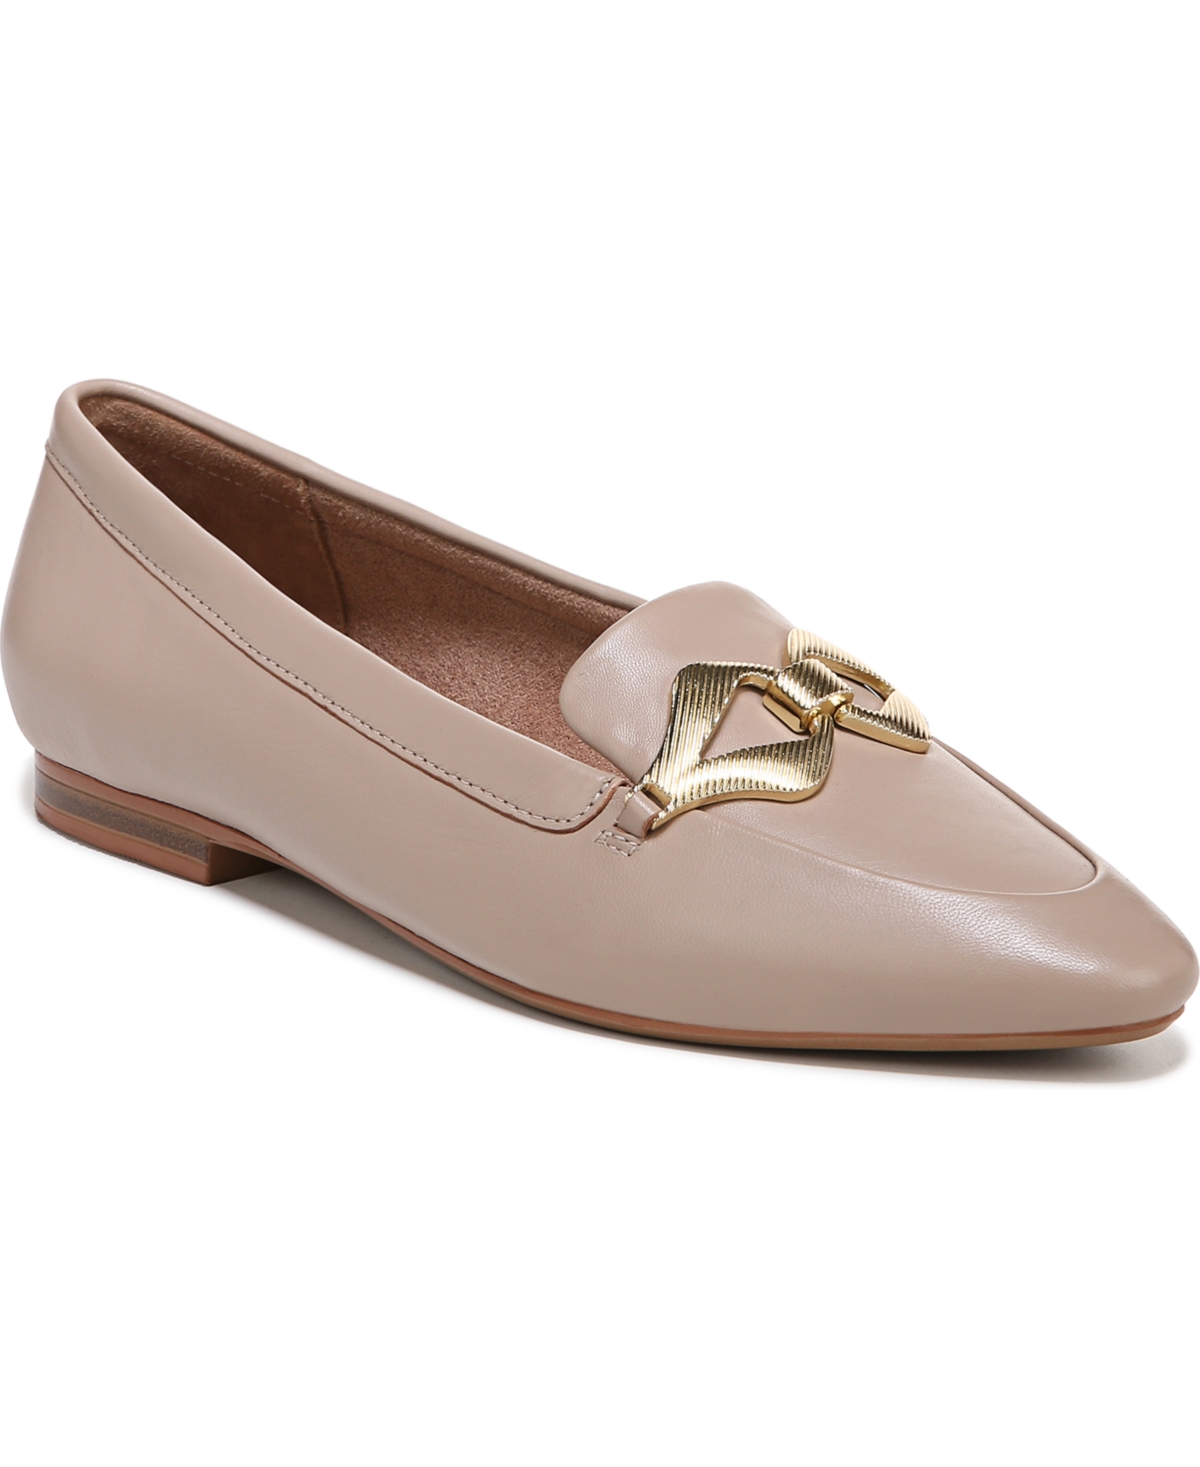 Naturalizer Leala Slip-on Loafers In Sand Drift Leather